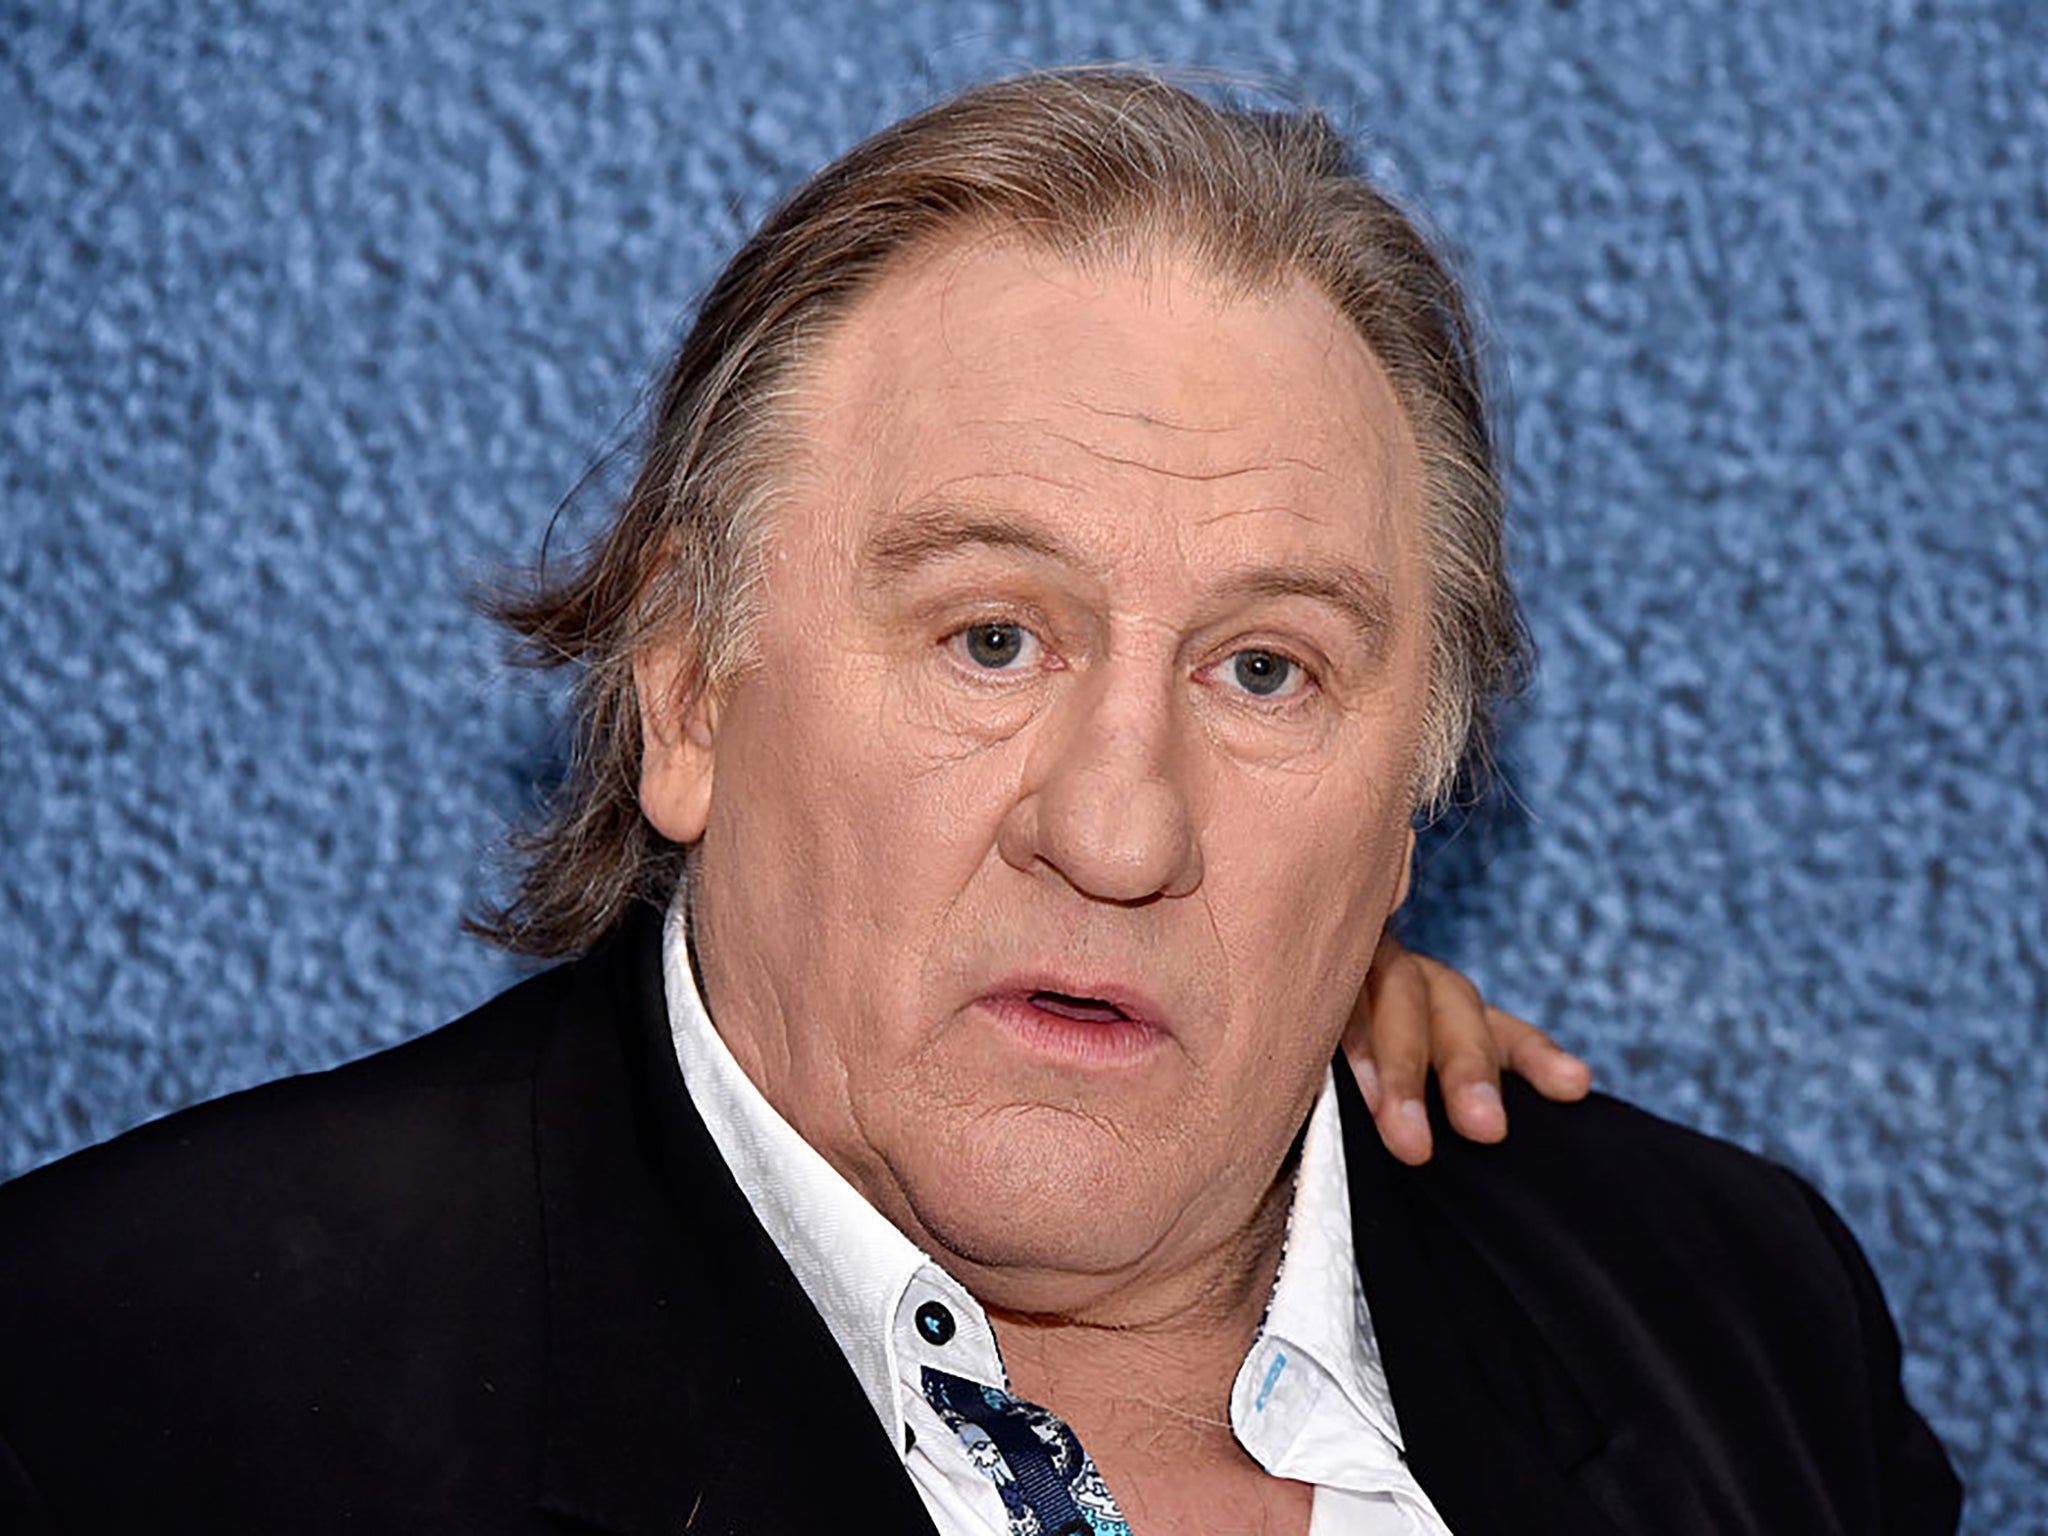 The French actor Gerard Depardieu